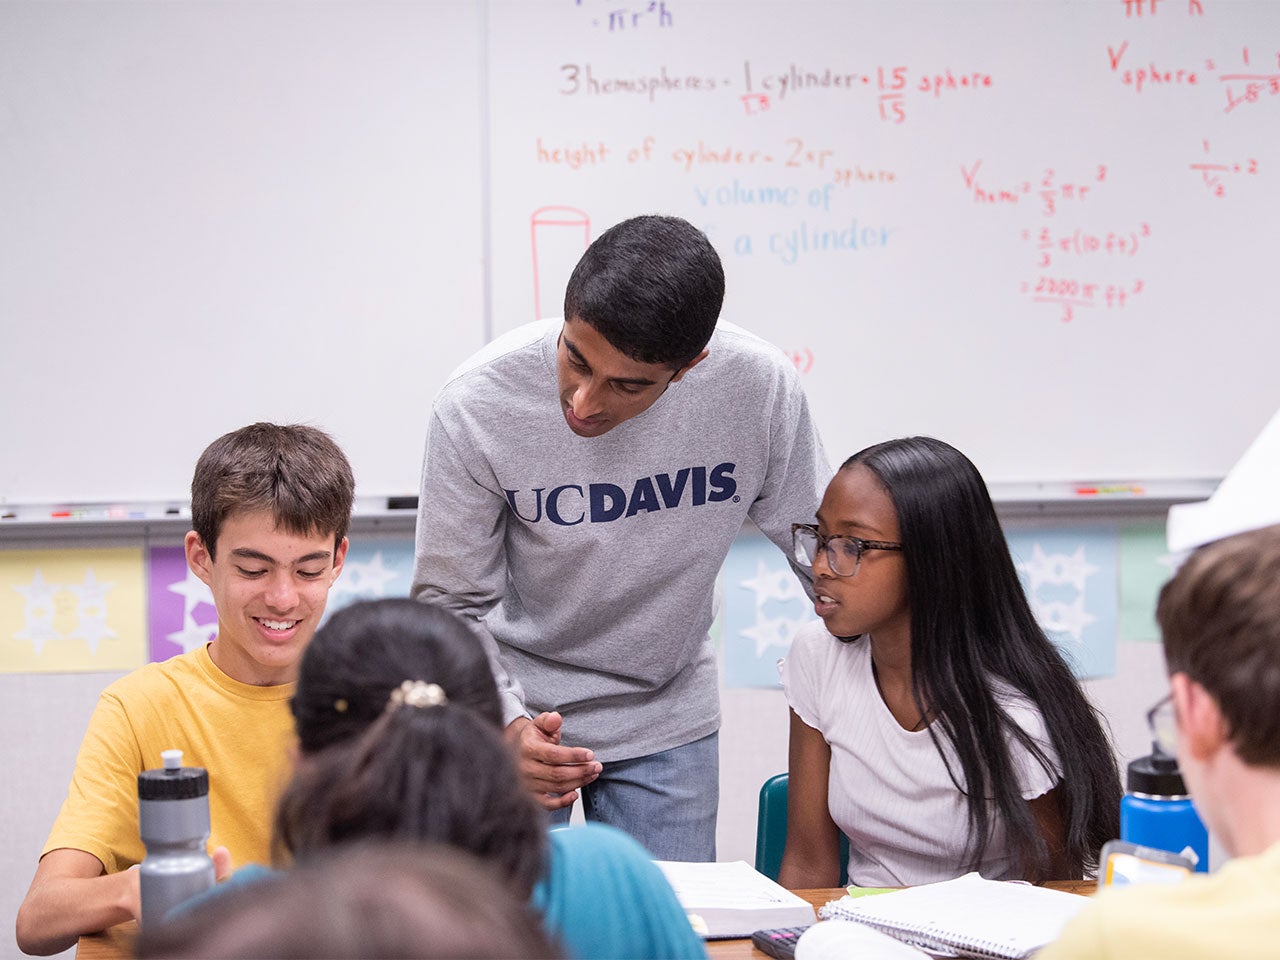 A student wearing a light gray long-sleeve ˽̳ Davis shirt leans down to assist two junior high school students. In the background is a large whiteboard with equations written on it.